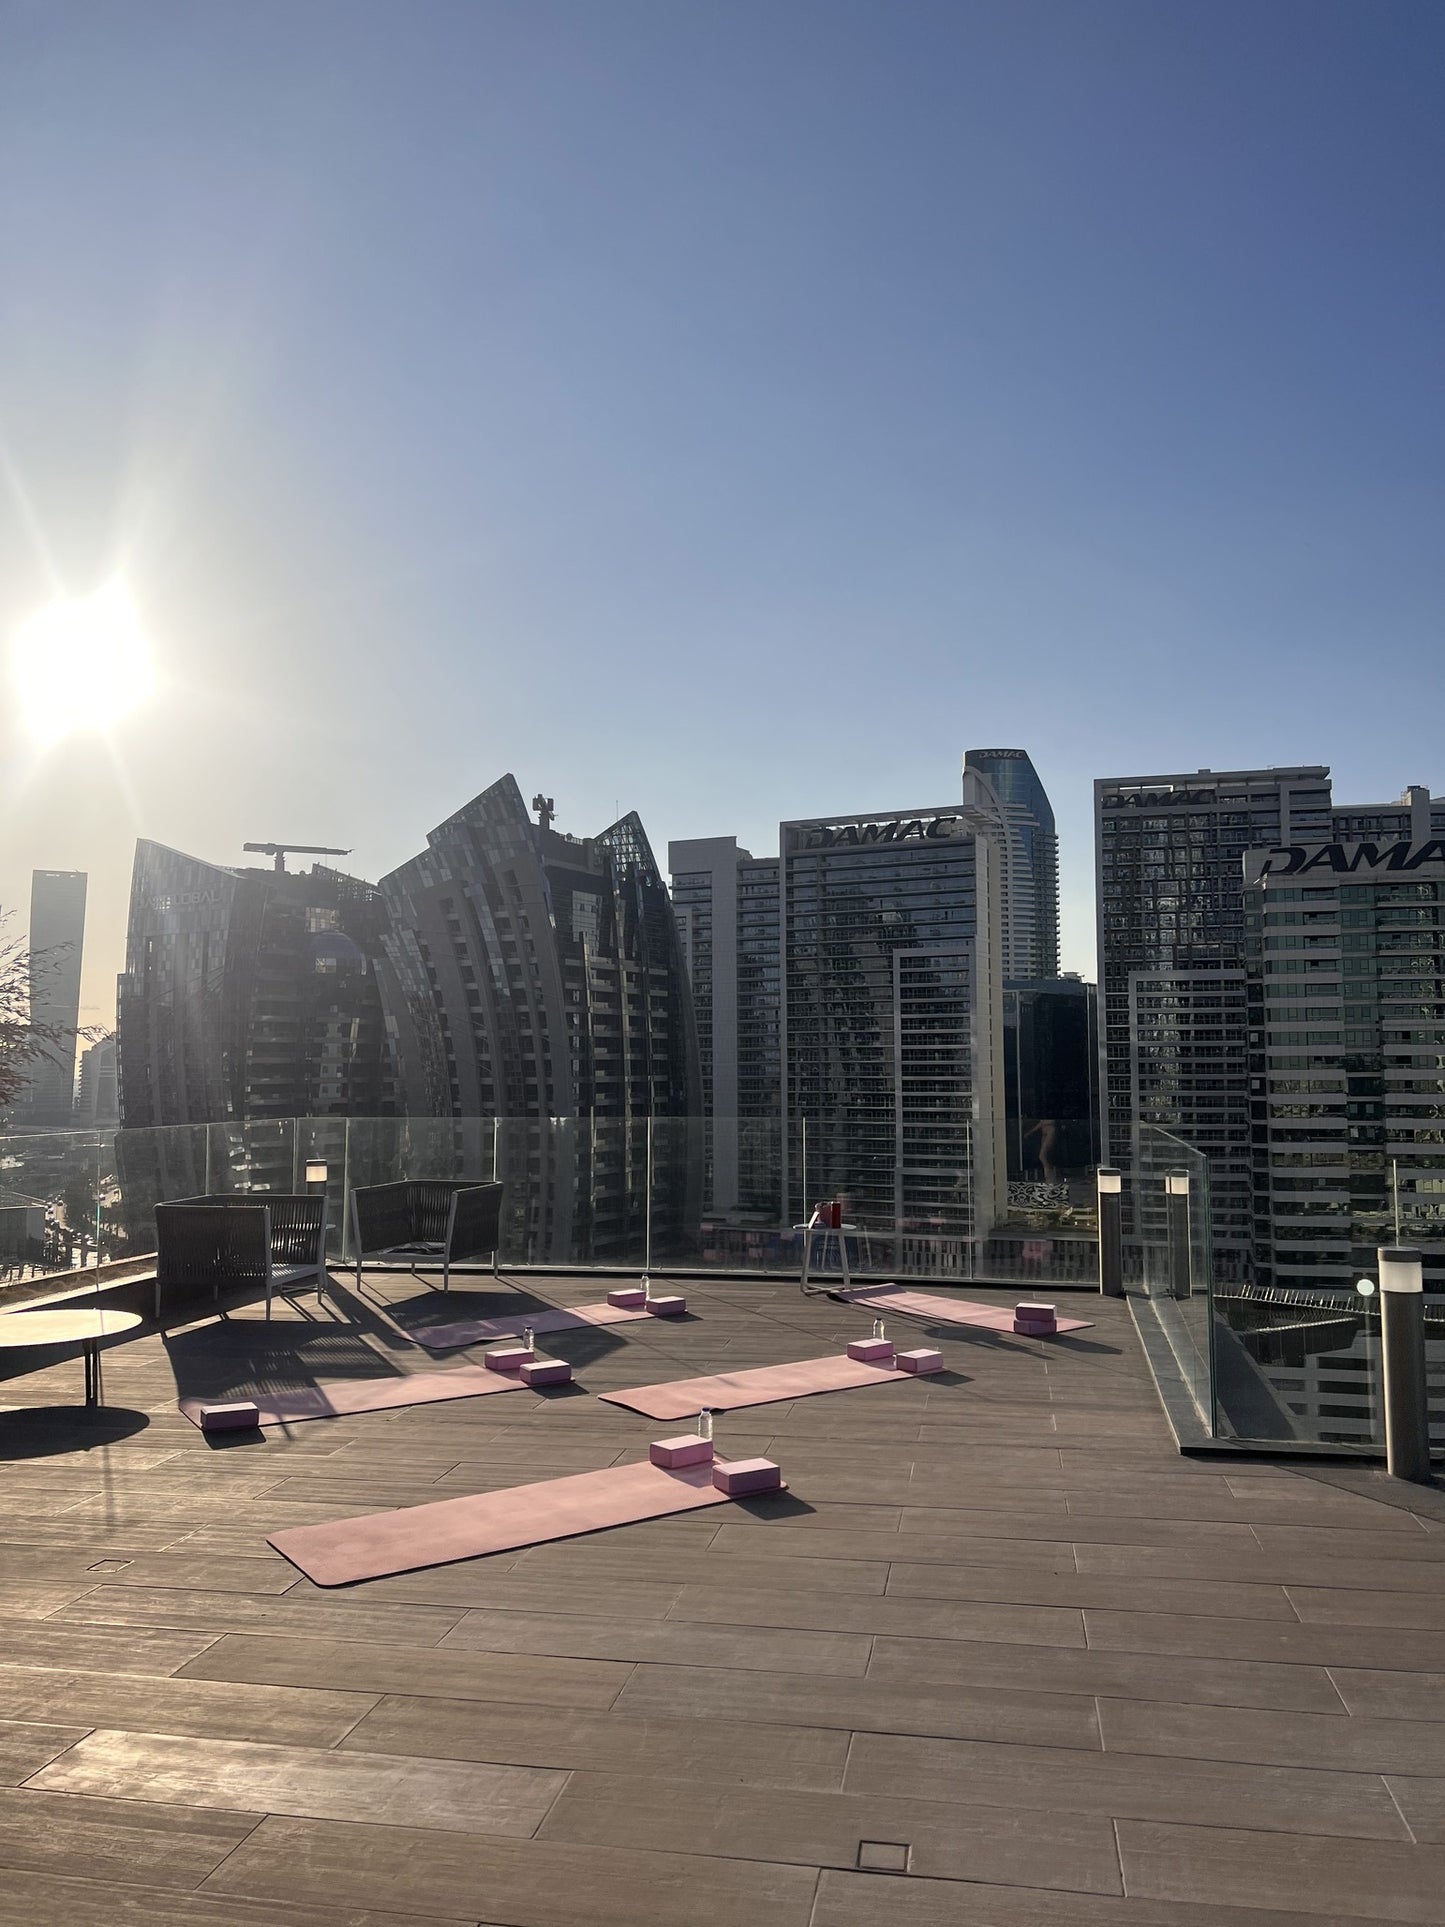 Sunset Rooftop Yoga - May 5th, 18:00